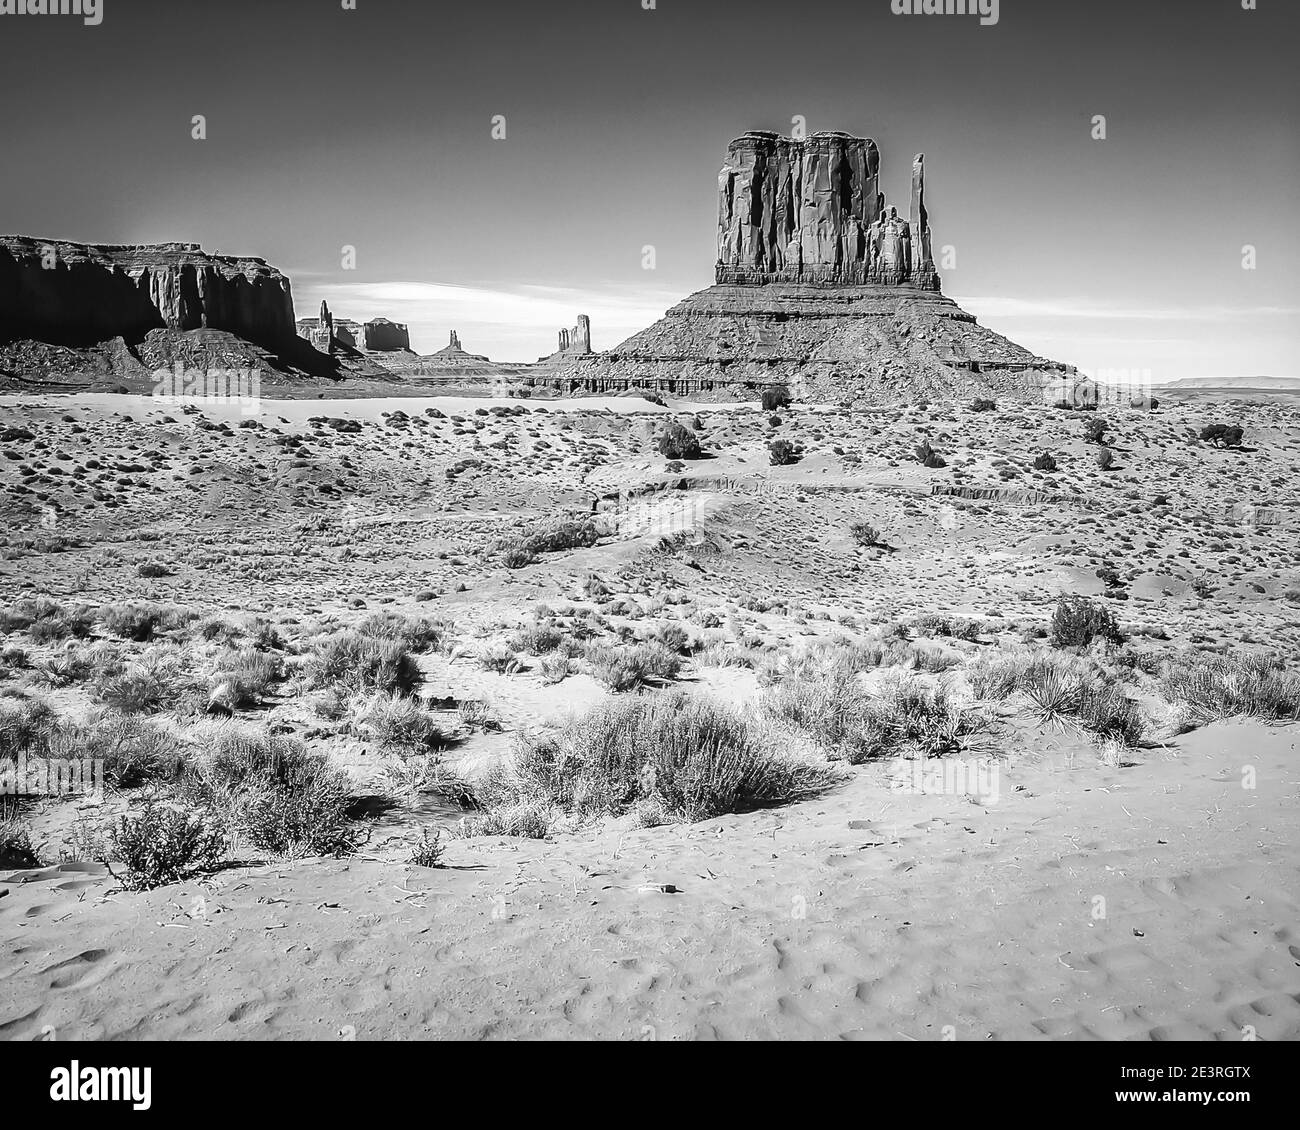 United States. The fabulous mountain and desert scenery of Monument Valley in monochrome in the Monument Valley National Park of Arizona in the United States. Seen here from near John Ford Point overlook that was used during the epic filming of the attack and hair raising chase by so called hostile Red Indians of the six team horse driven Wells Fargo Stage Coach in the Western film Stagecoach that starred a very young up-coming actor called John Wayne, its a classic piece of movie making. Stock Photo